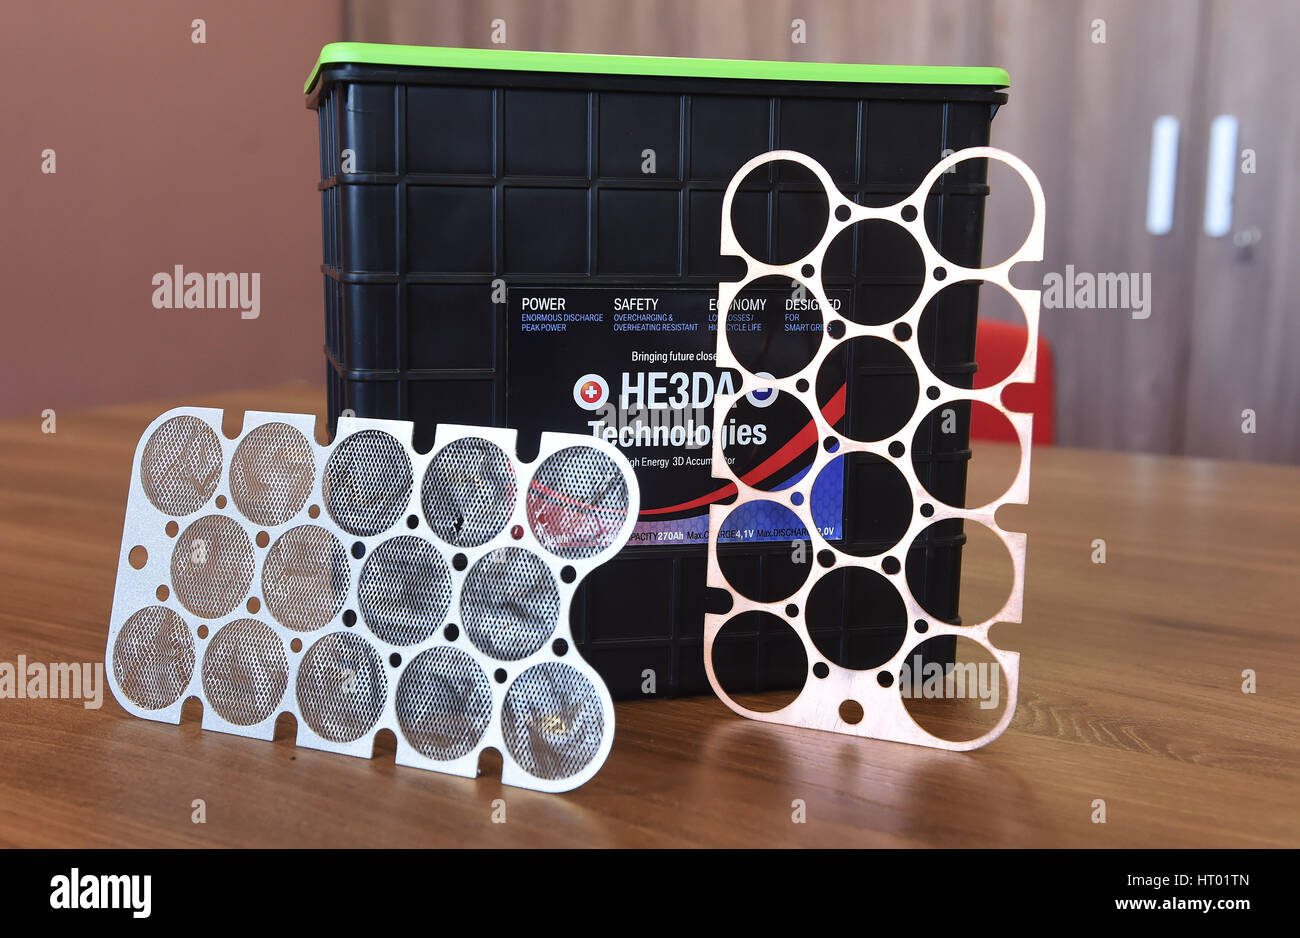 Czech company HE3DA, developing battery technologies, is launching Kc5.5bn  project Magna Energy Storage for battery production in which up to 250  people are to find work, the company's co-owners Vladimir Jirka and